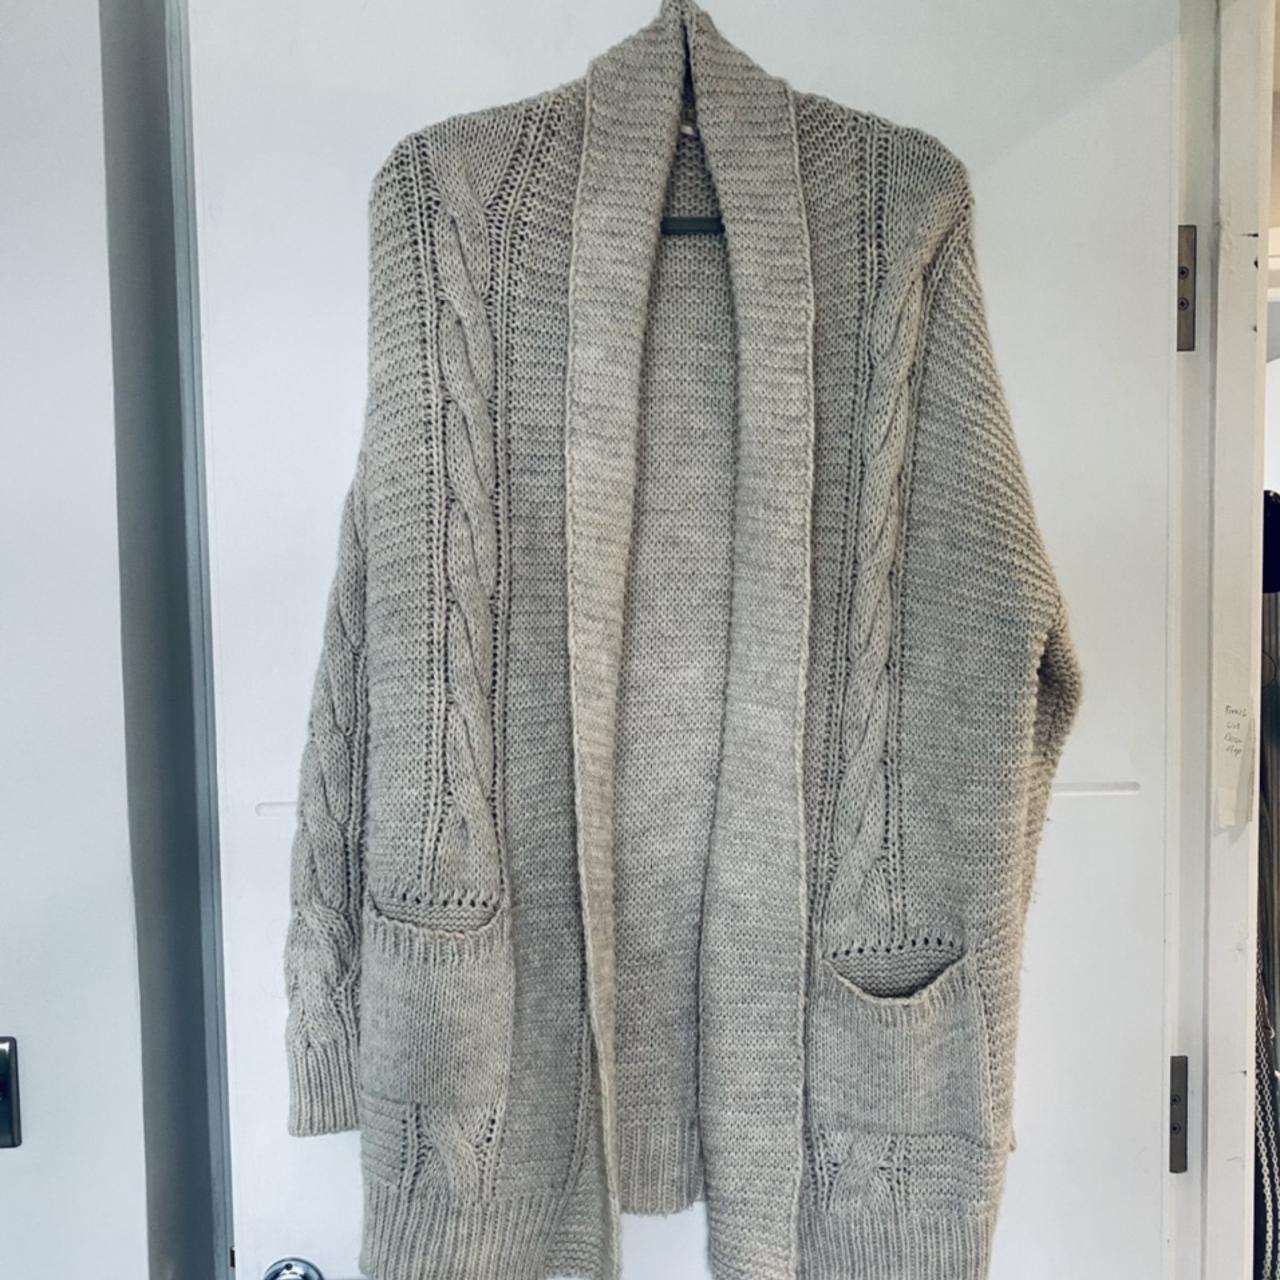 & Other Stories Women's Cream and Grey Cardigan